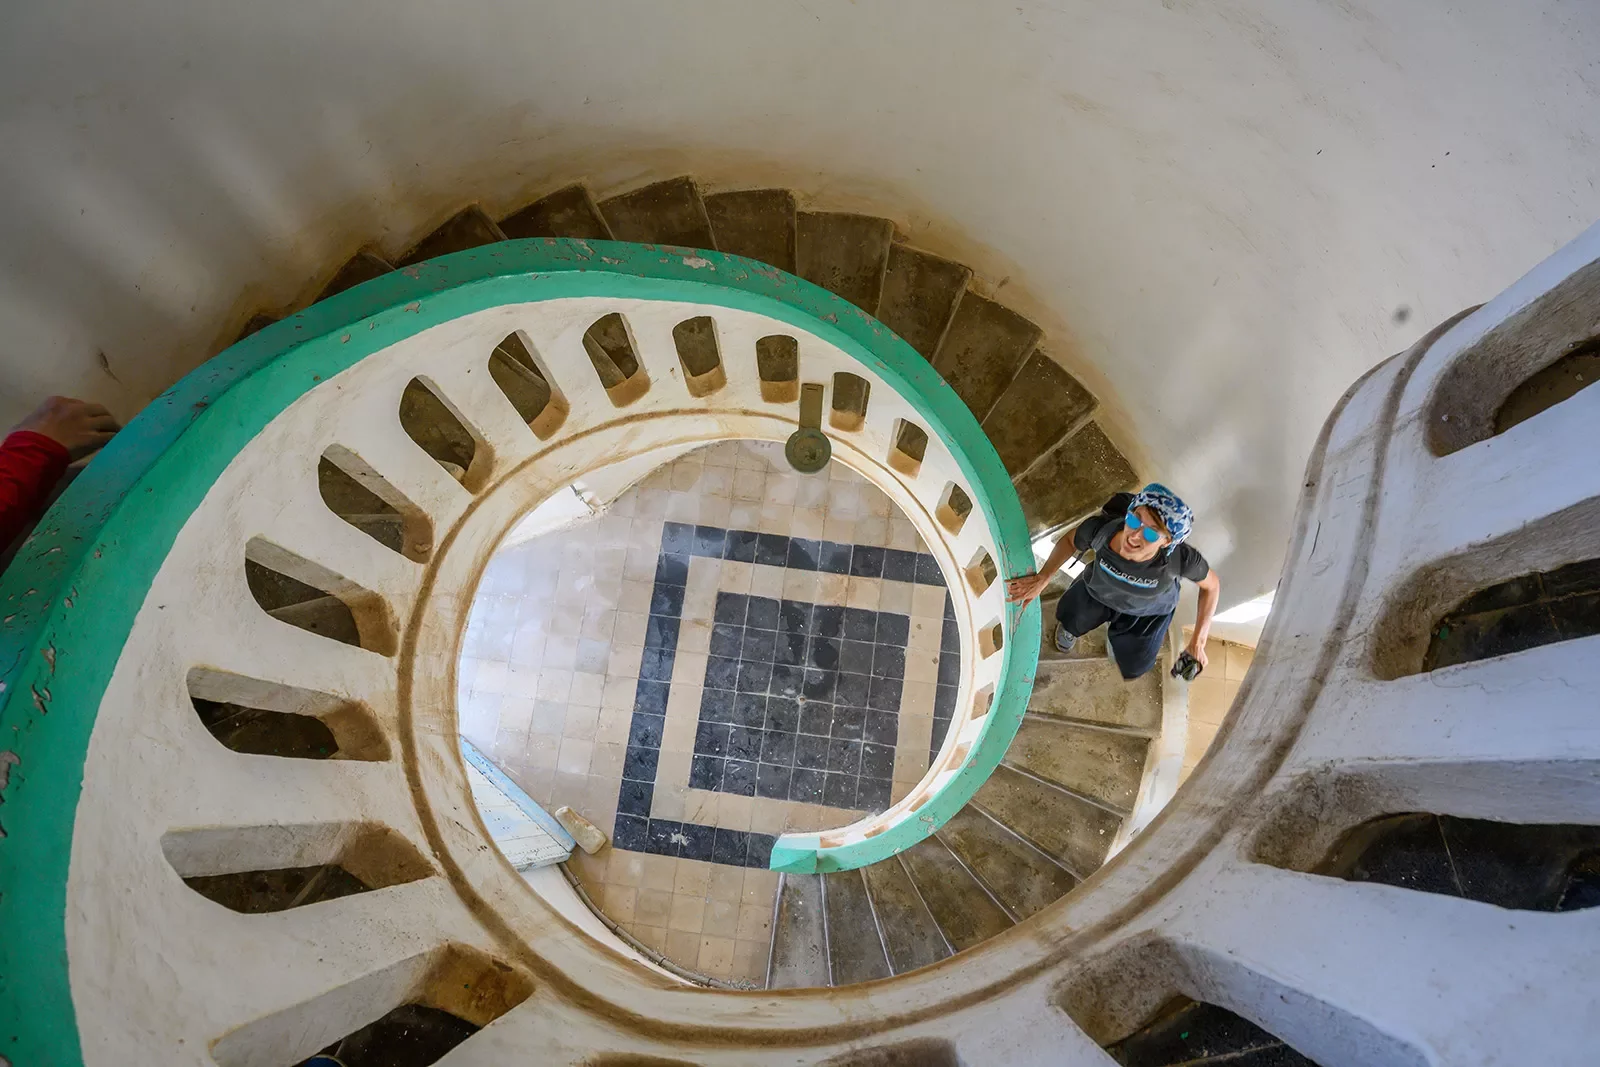 Looking down from a spiral staircase while a traveler looks up